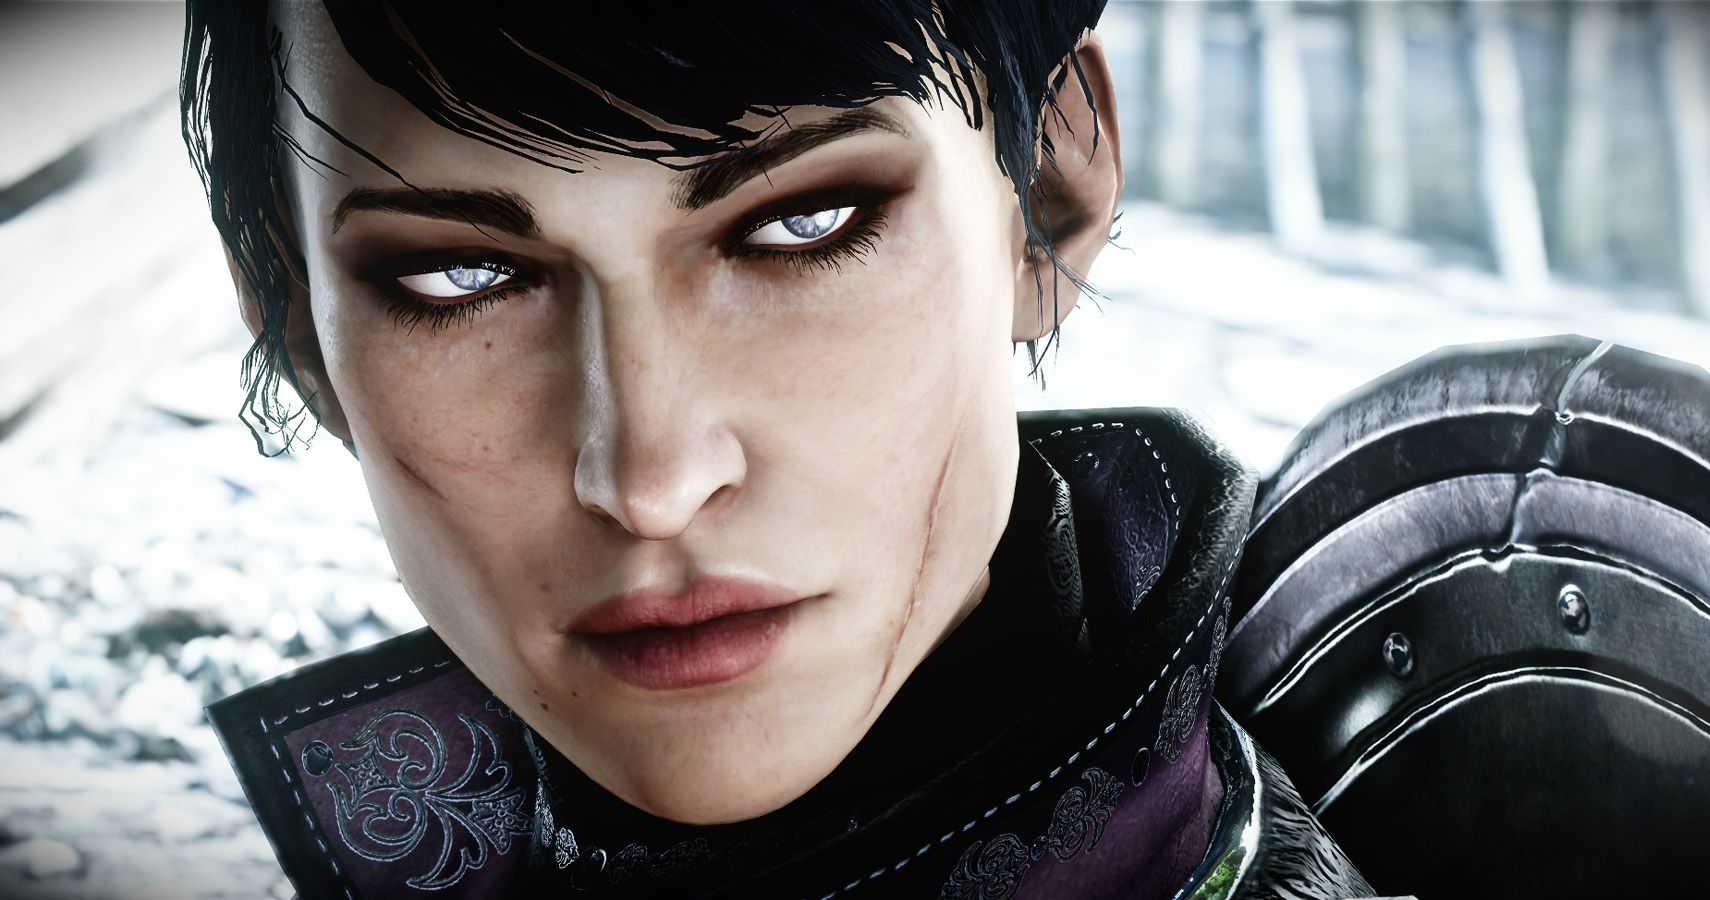 The Right Hand of the Divine Cassandra Pereghast in Dragon Age: Inquisition